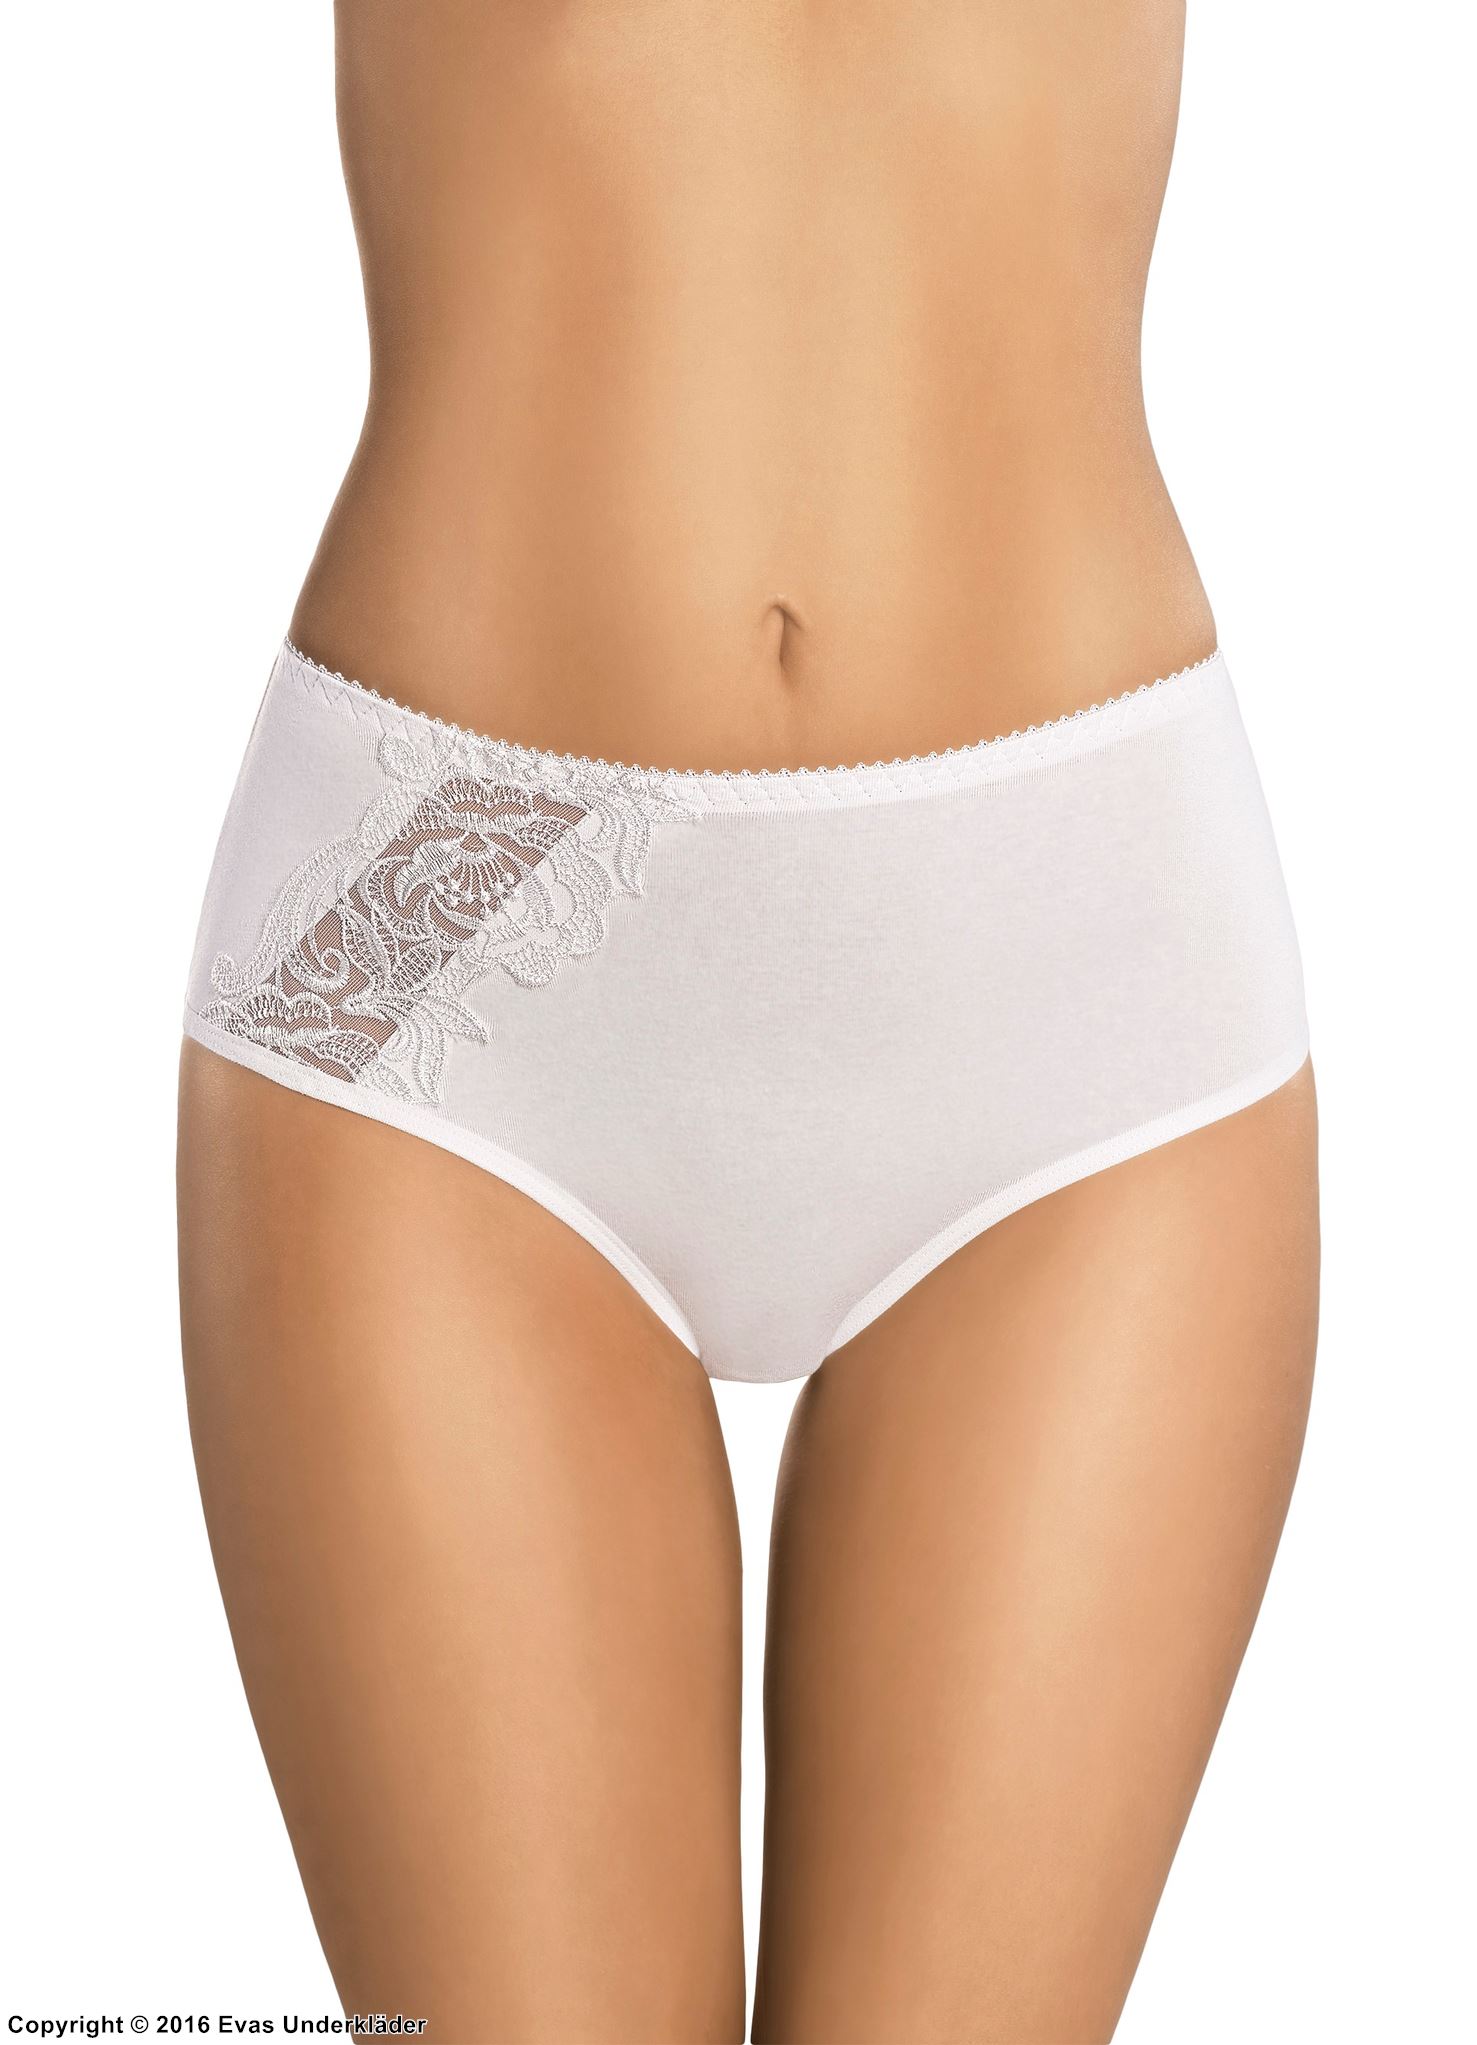 Classic briefs, high quality cotton, lace embroidery